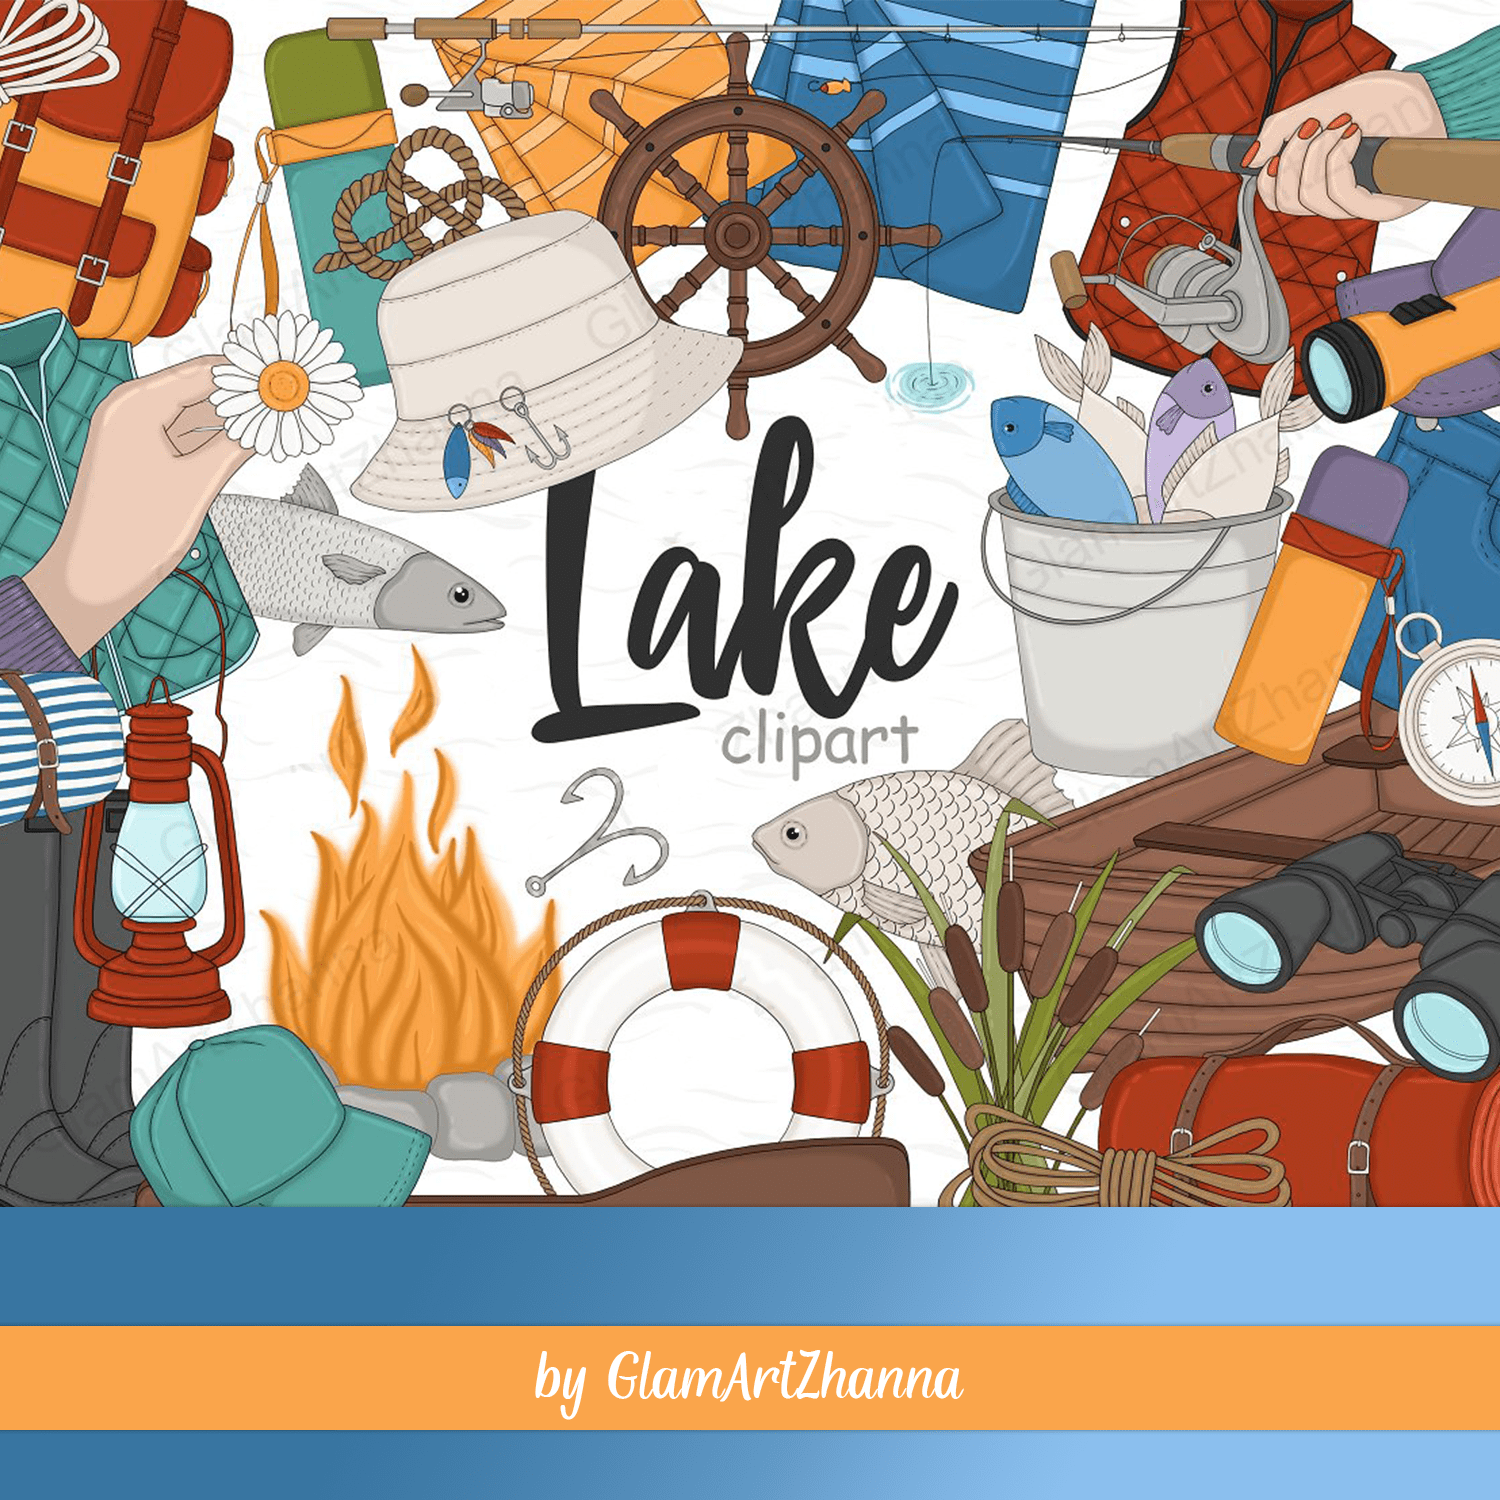 Lake Clipart cover.